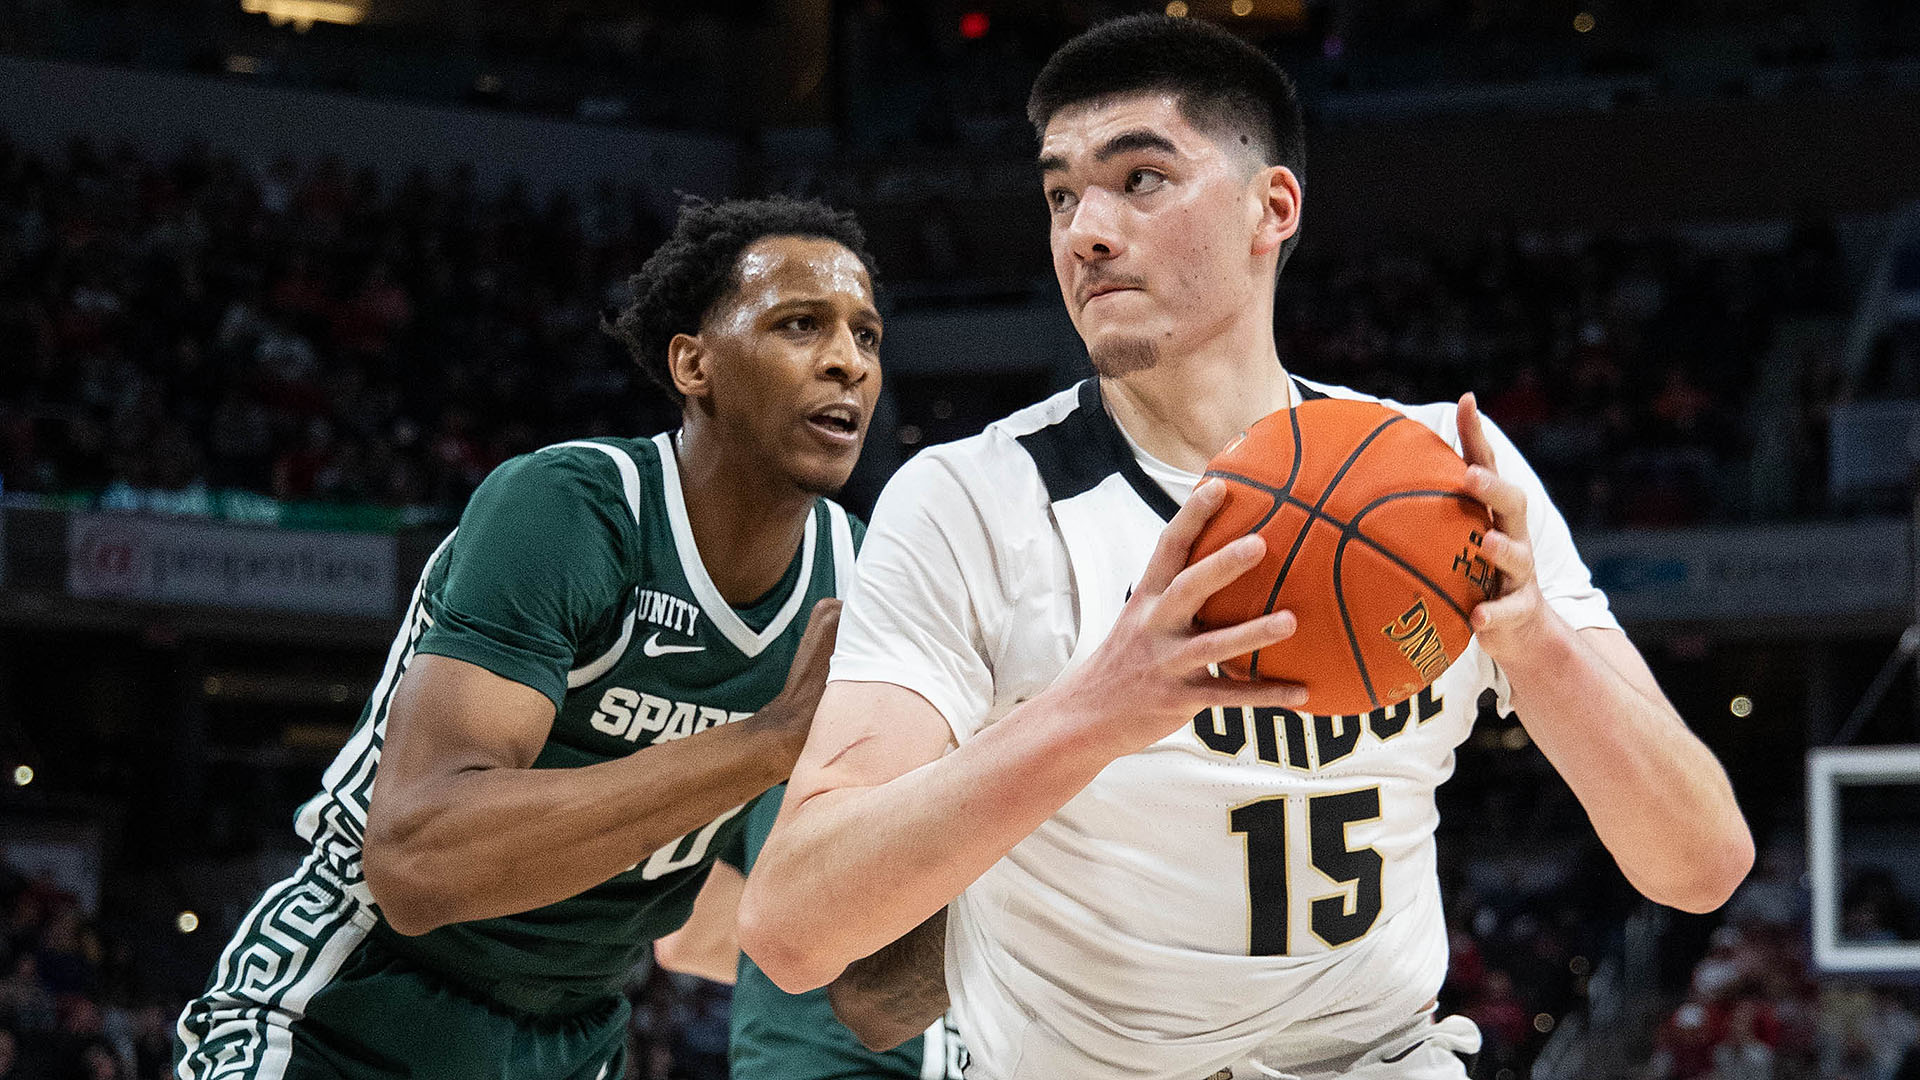 Purdue's Zach Edey opts to withdraw from NBA draft